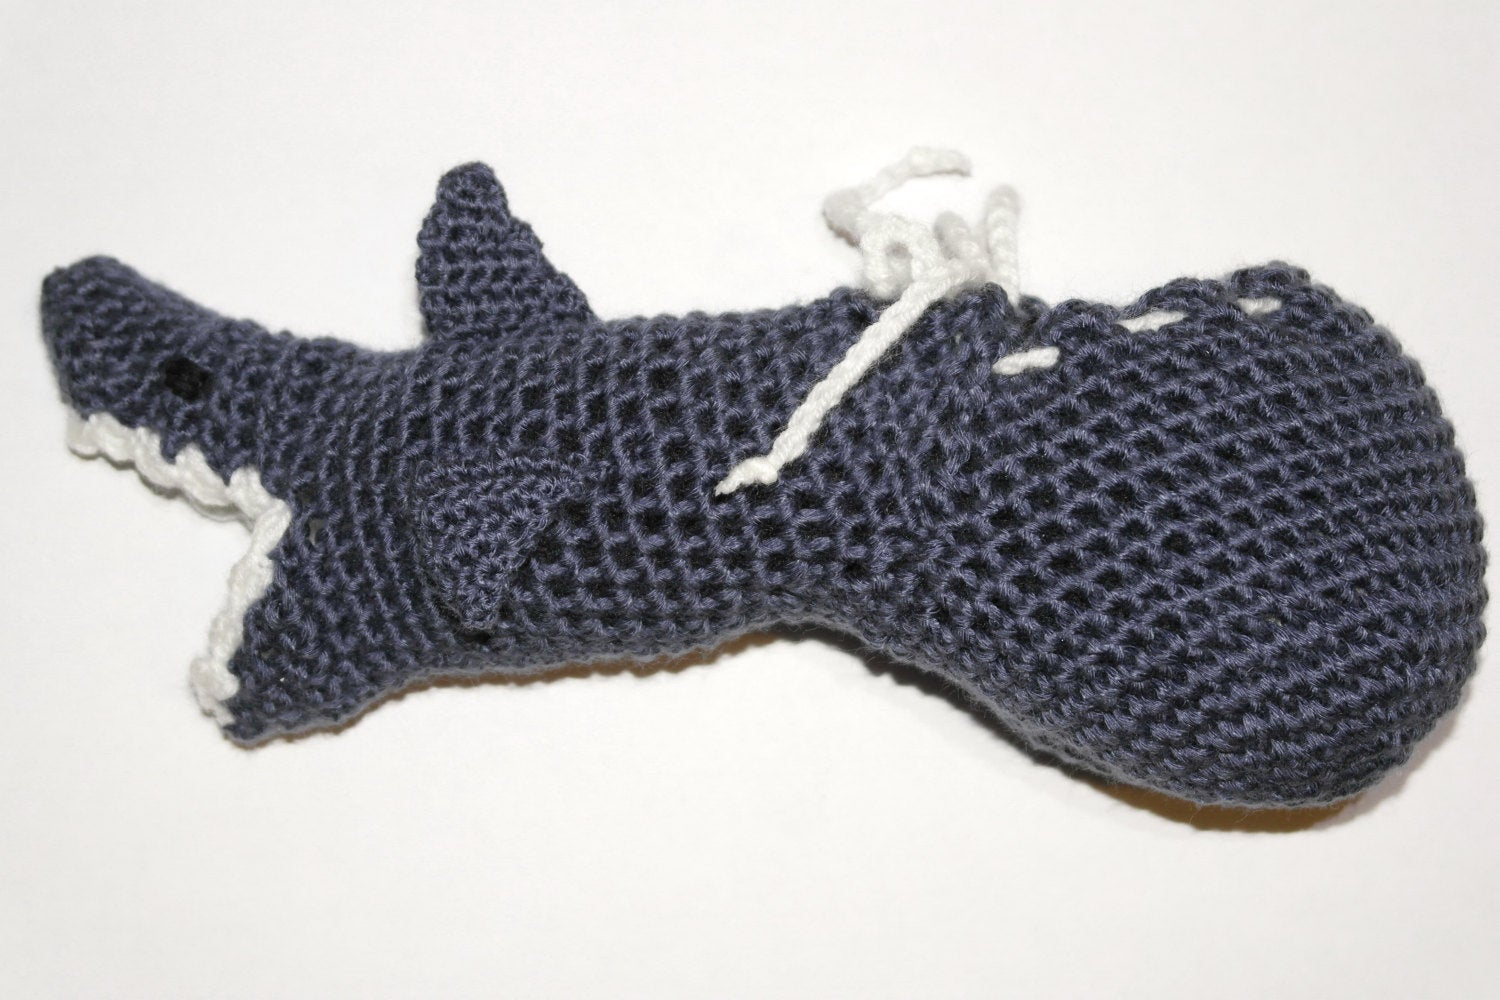 Willie Warmer Knitting Pattern Free Crochet Shark Original Willy Warmer Mens Sexy Underwear Erotic Mens Thong Boyfriend Gift Penis Warmer Outfit Costume Gift Knitted